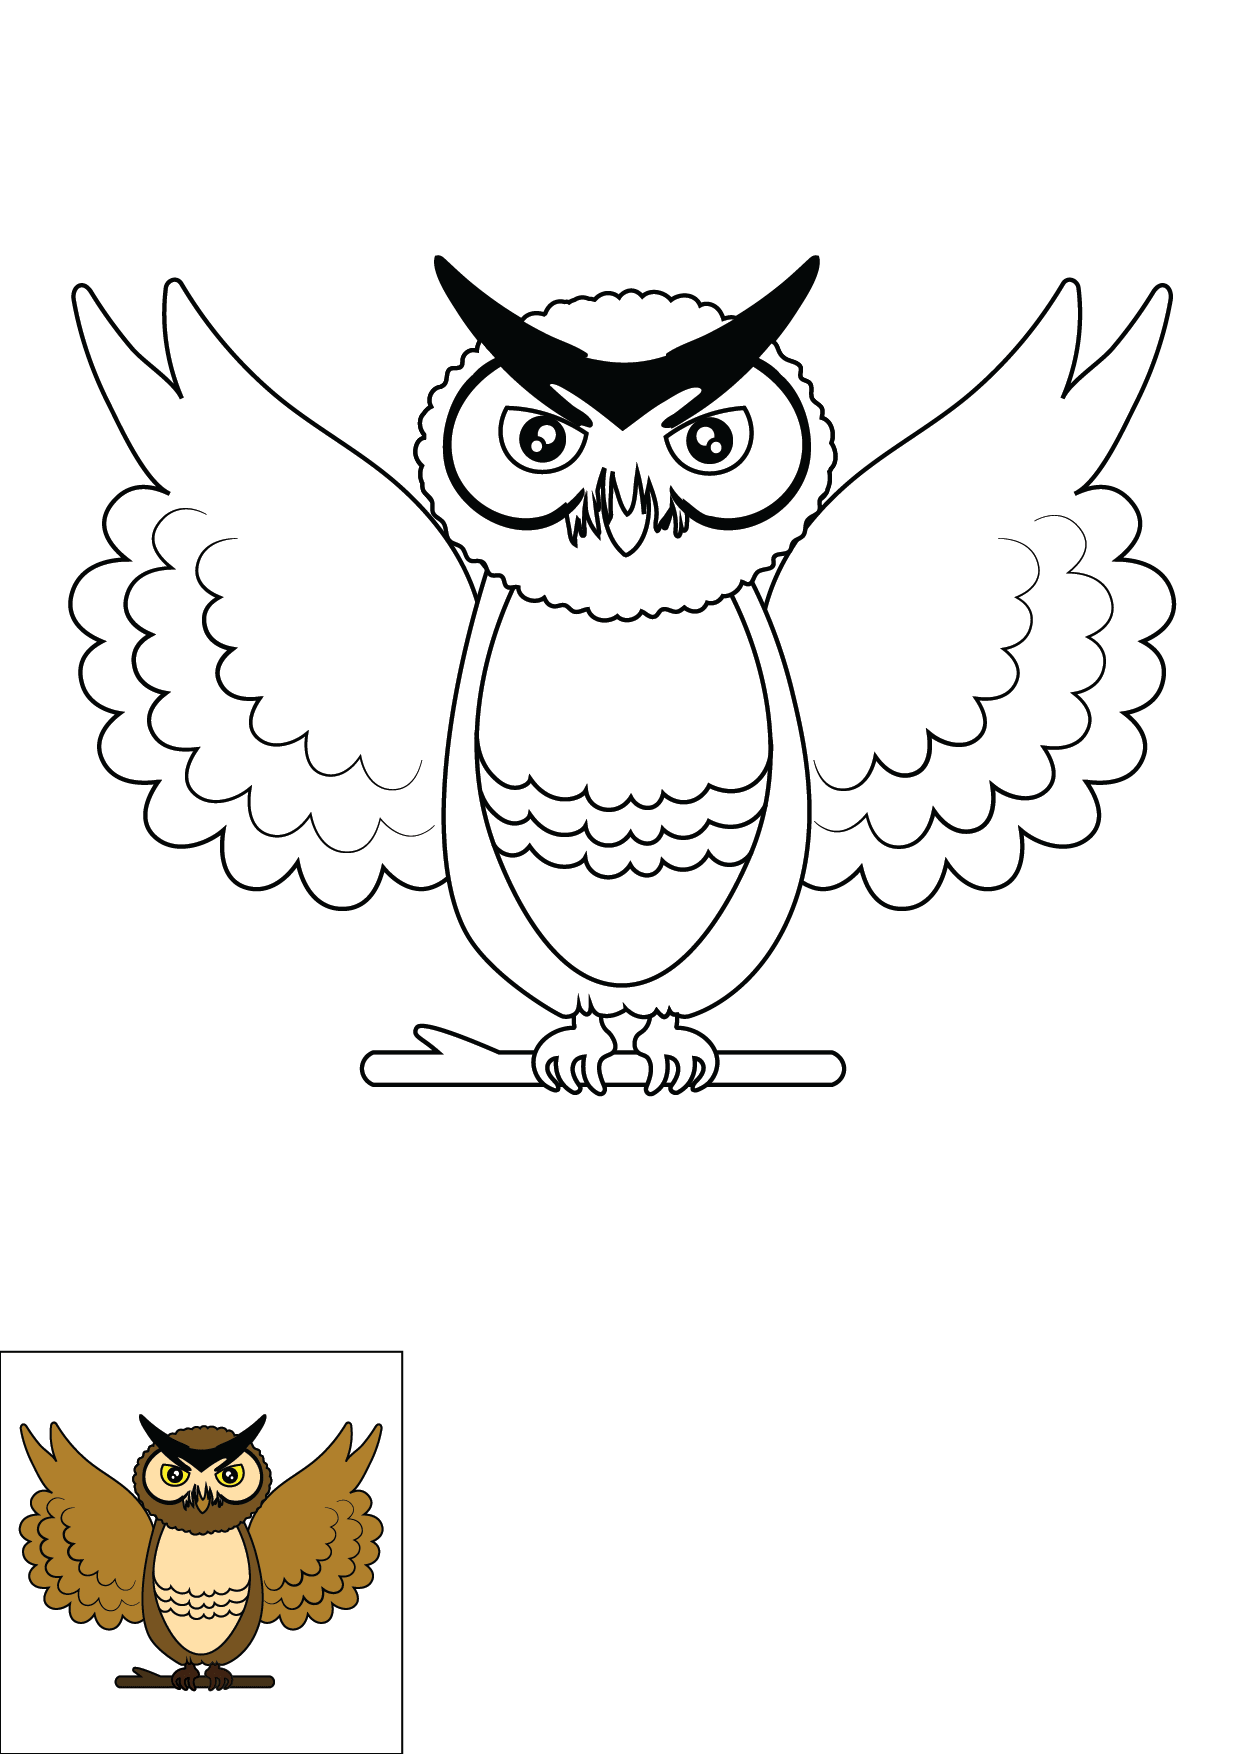 How to Draw An Owl Step by Step Printable Color